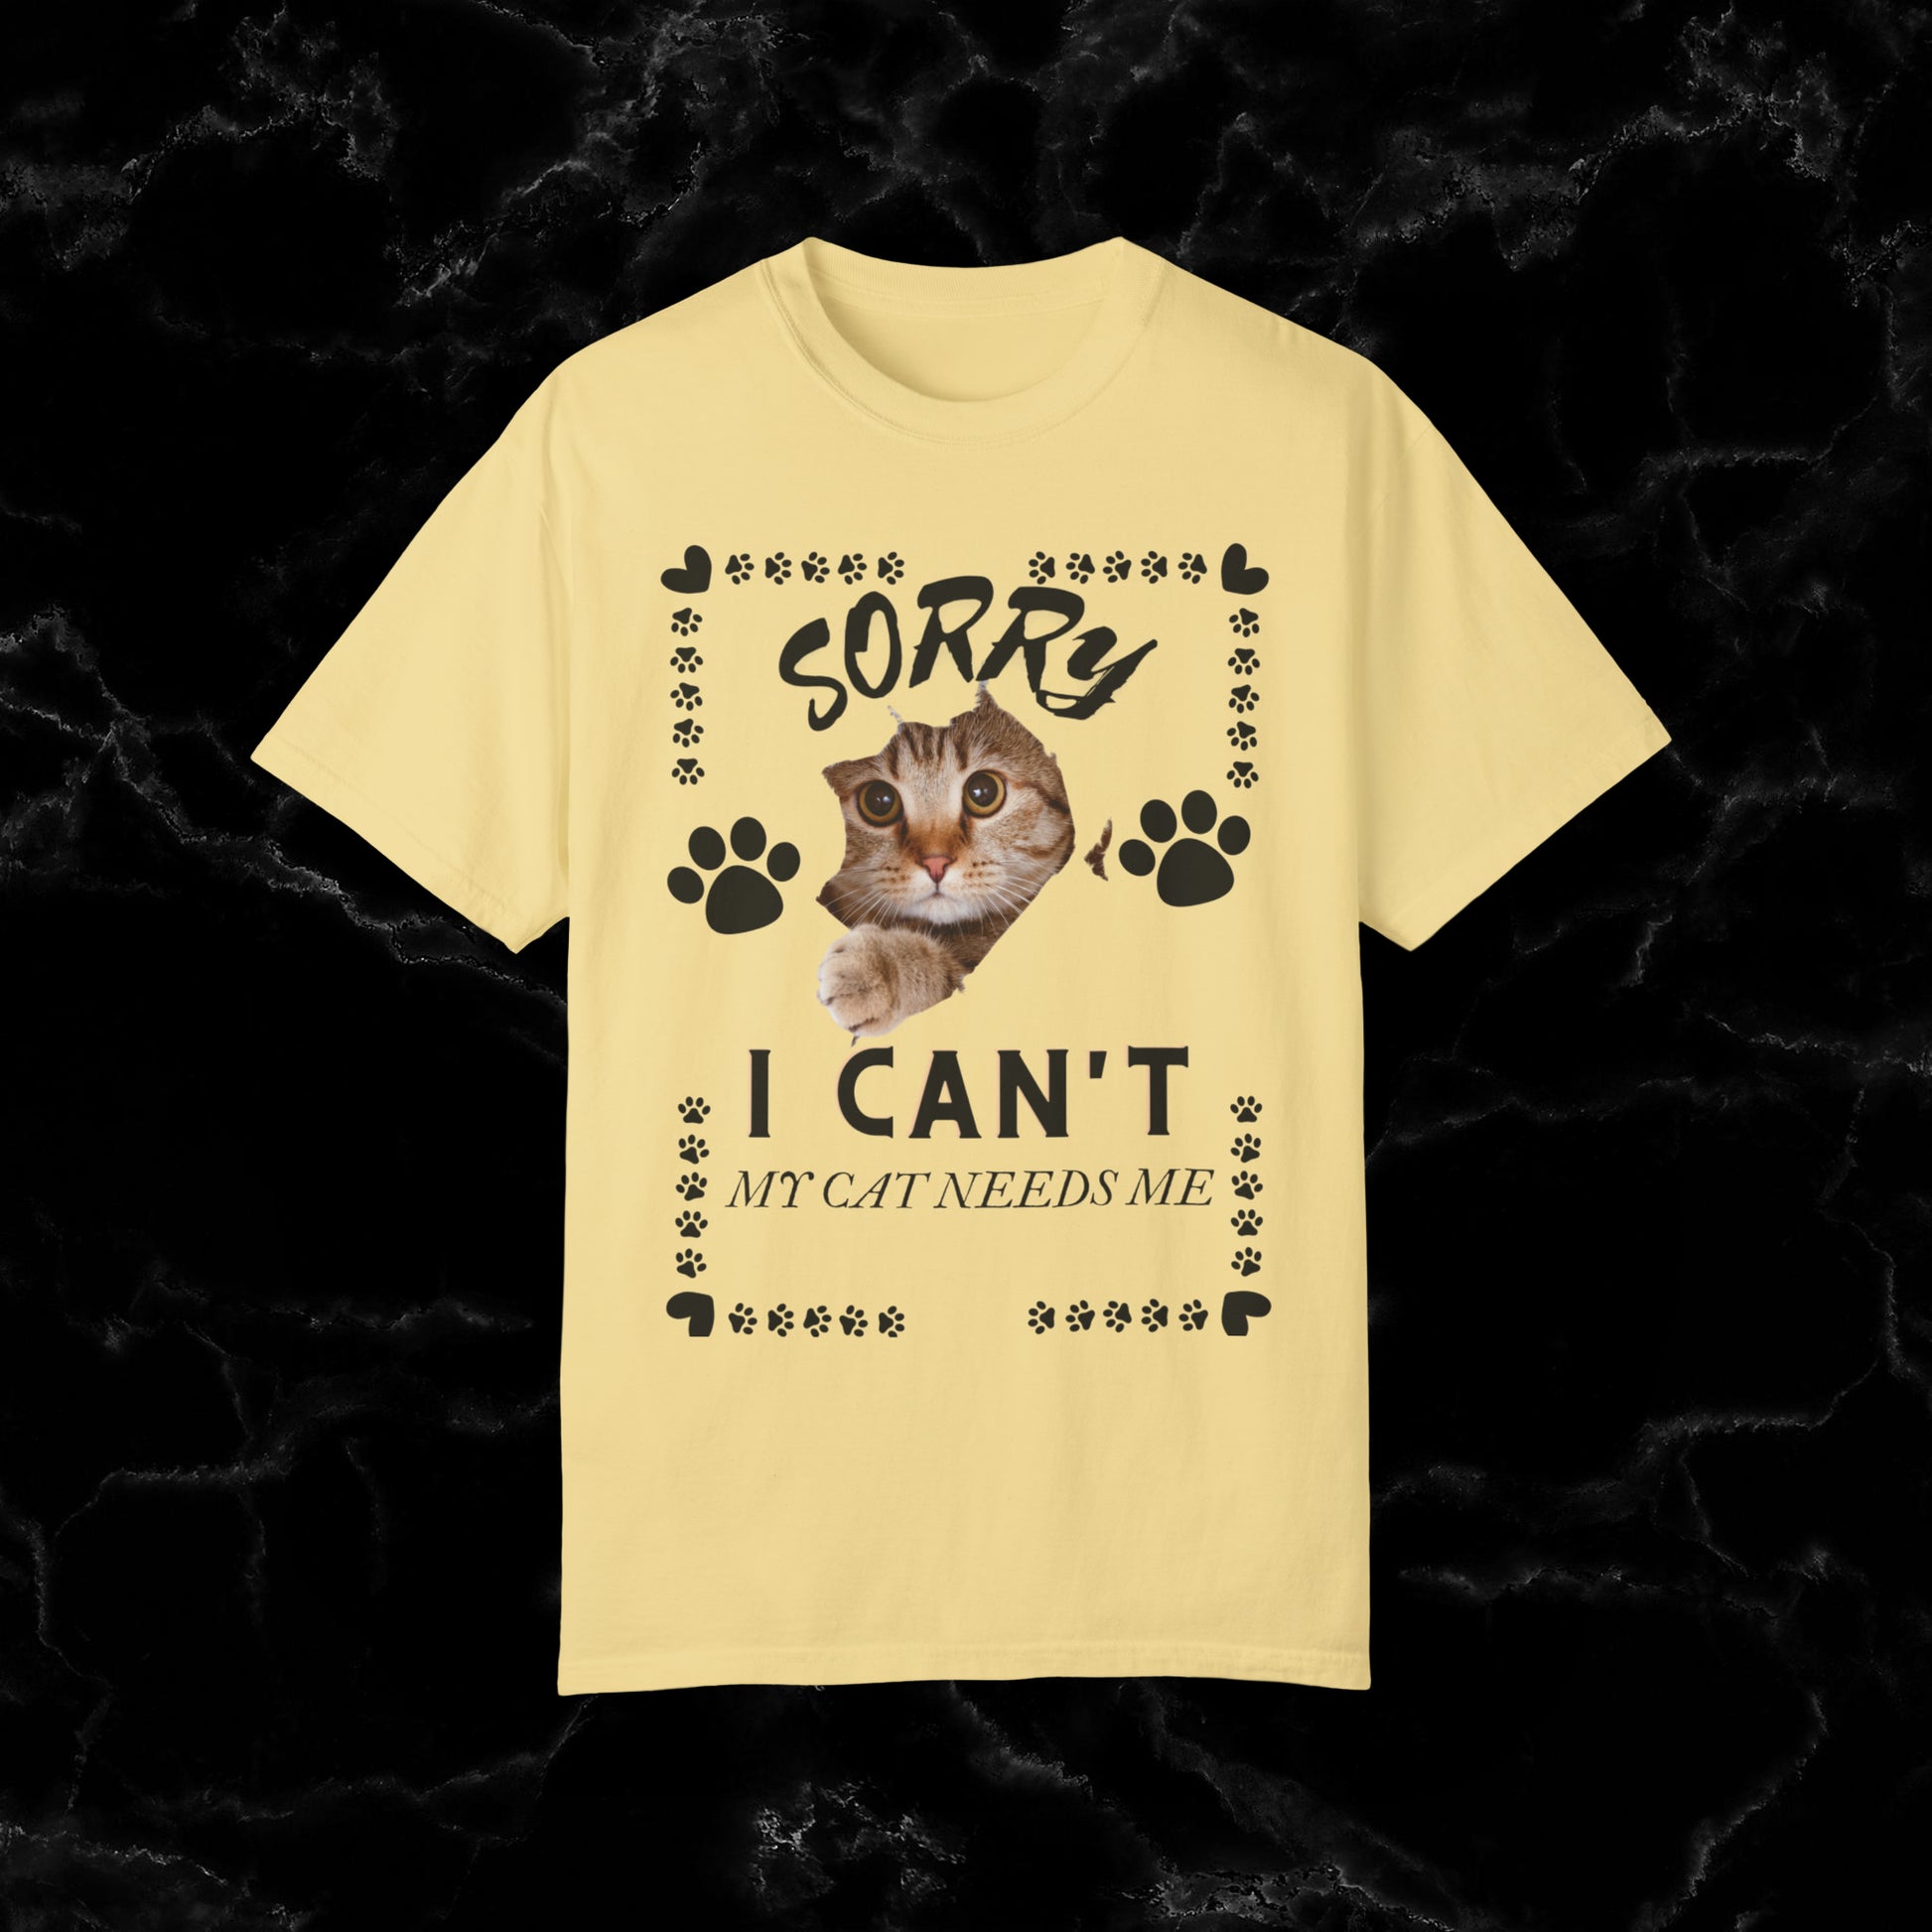 Sorry I Can't, My Cat Needs Me T-Shirt - Perfect Gift for Cat Moms and Animal Lovers T-Shirt Butter S 